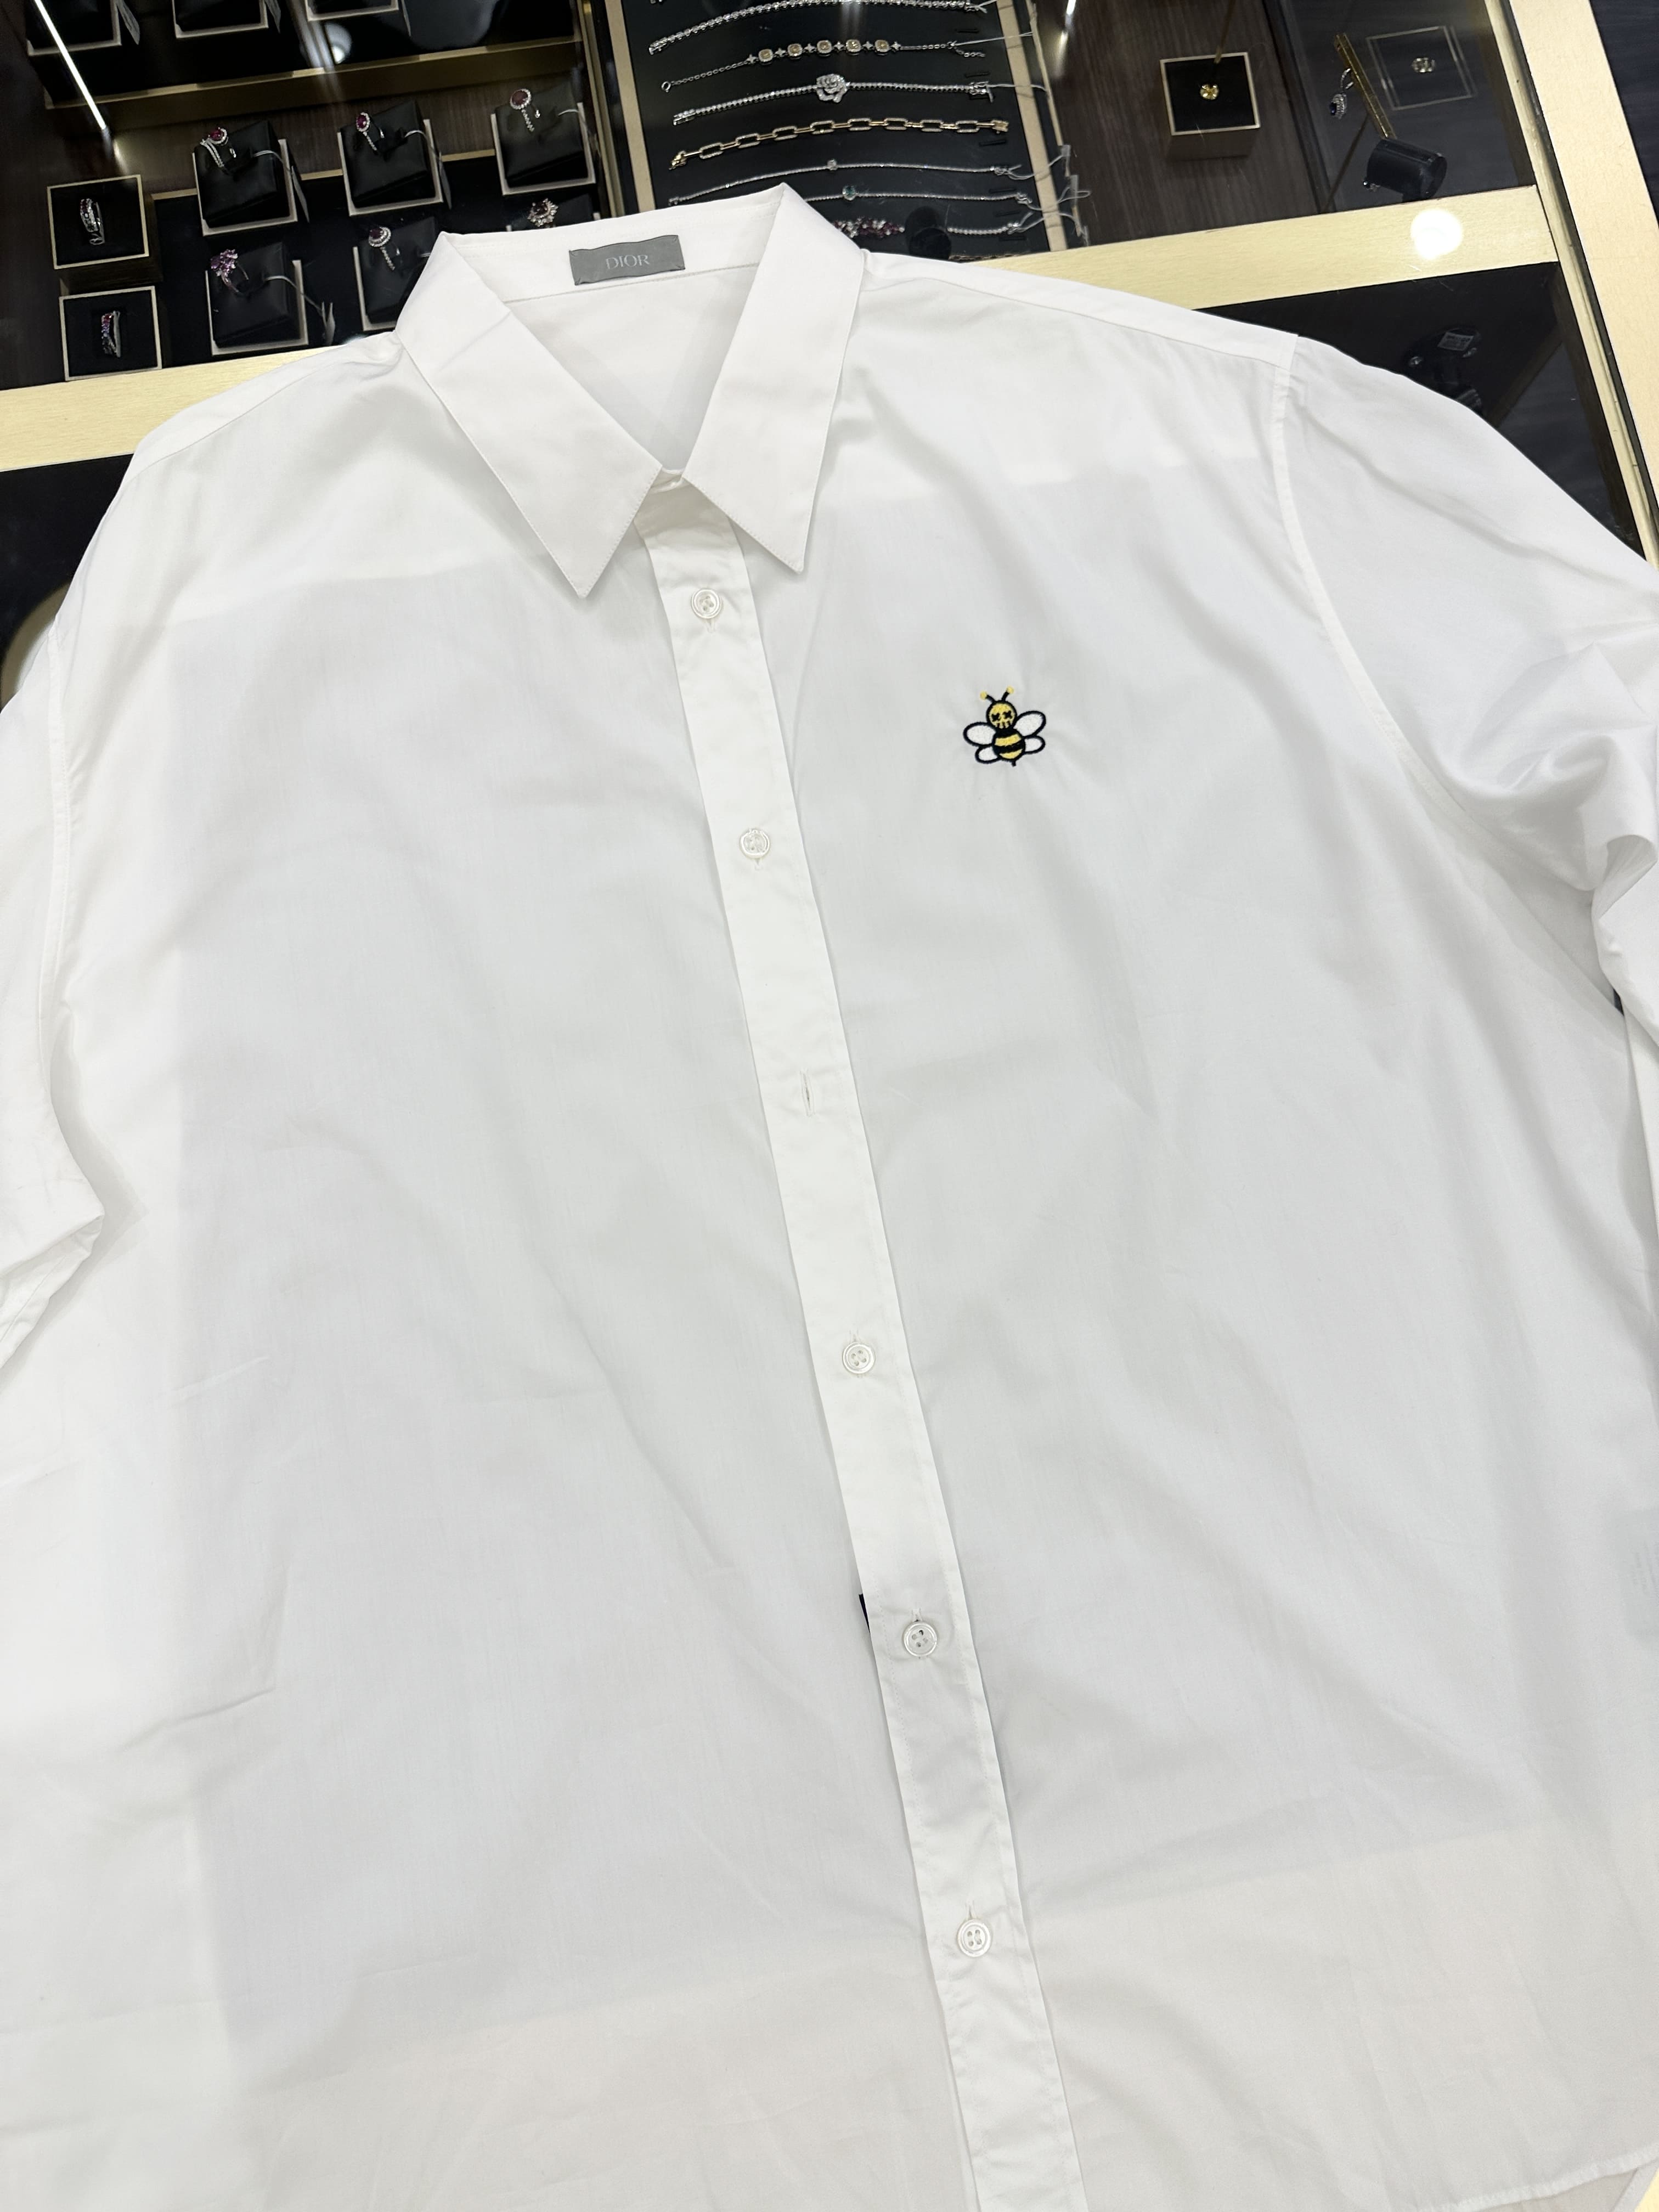 Dior Homme x Kaws Bee Patch Shirt White Cotton 